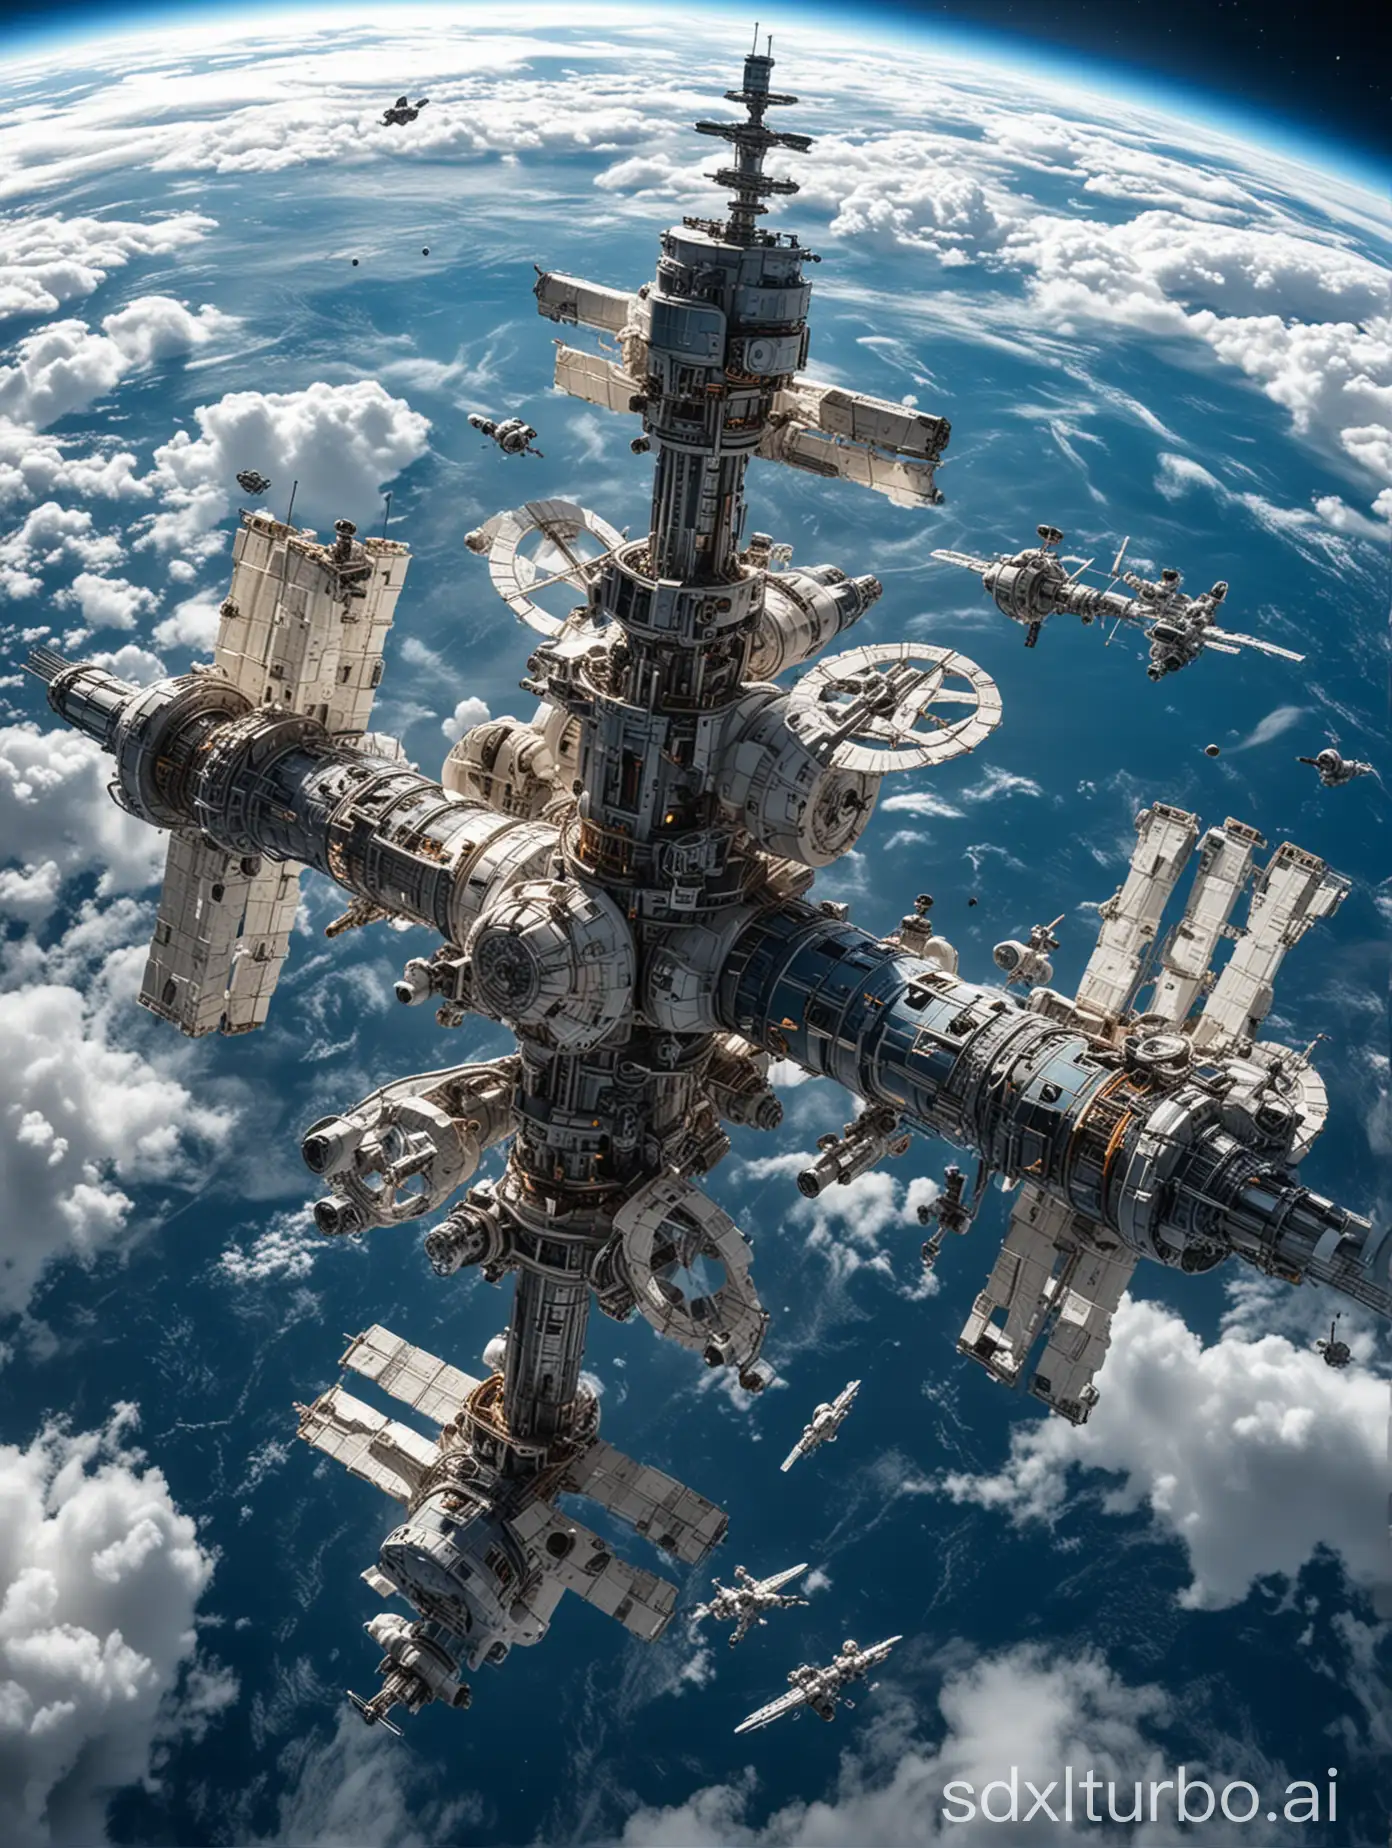 Futuristic-Space-Station-Orbiting-Earth-Advanced-Technology-Amidst-Clouds